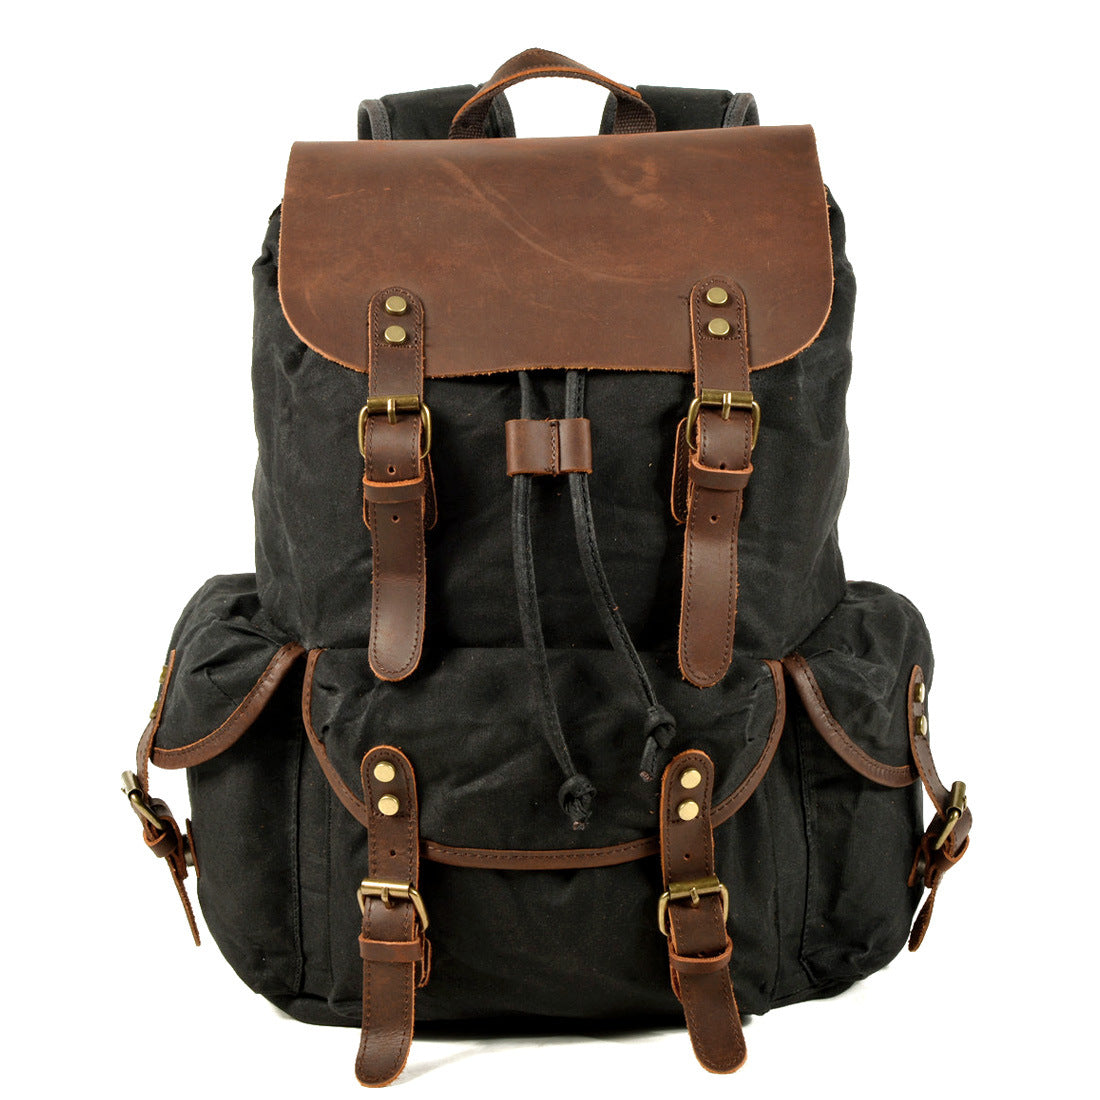 Casual Vintage Drawstrawing Waxed Canvas Hiking Rucksack 6105-Leather Canvas Backpack-Black-Free Shipping Leatheretro